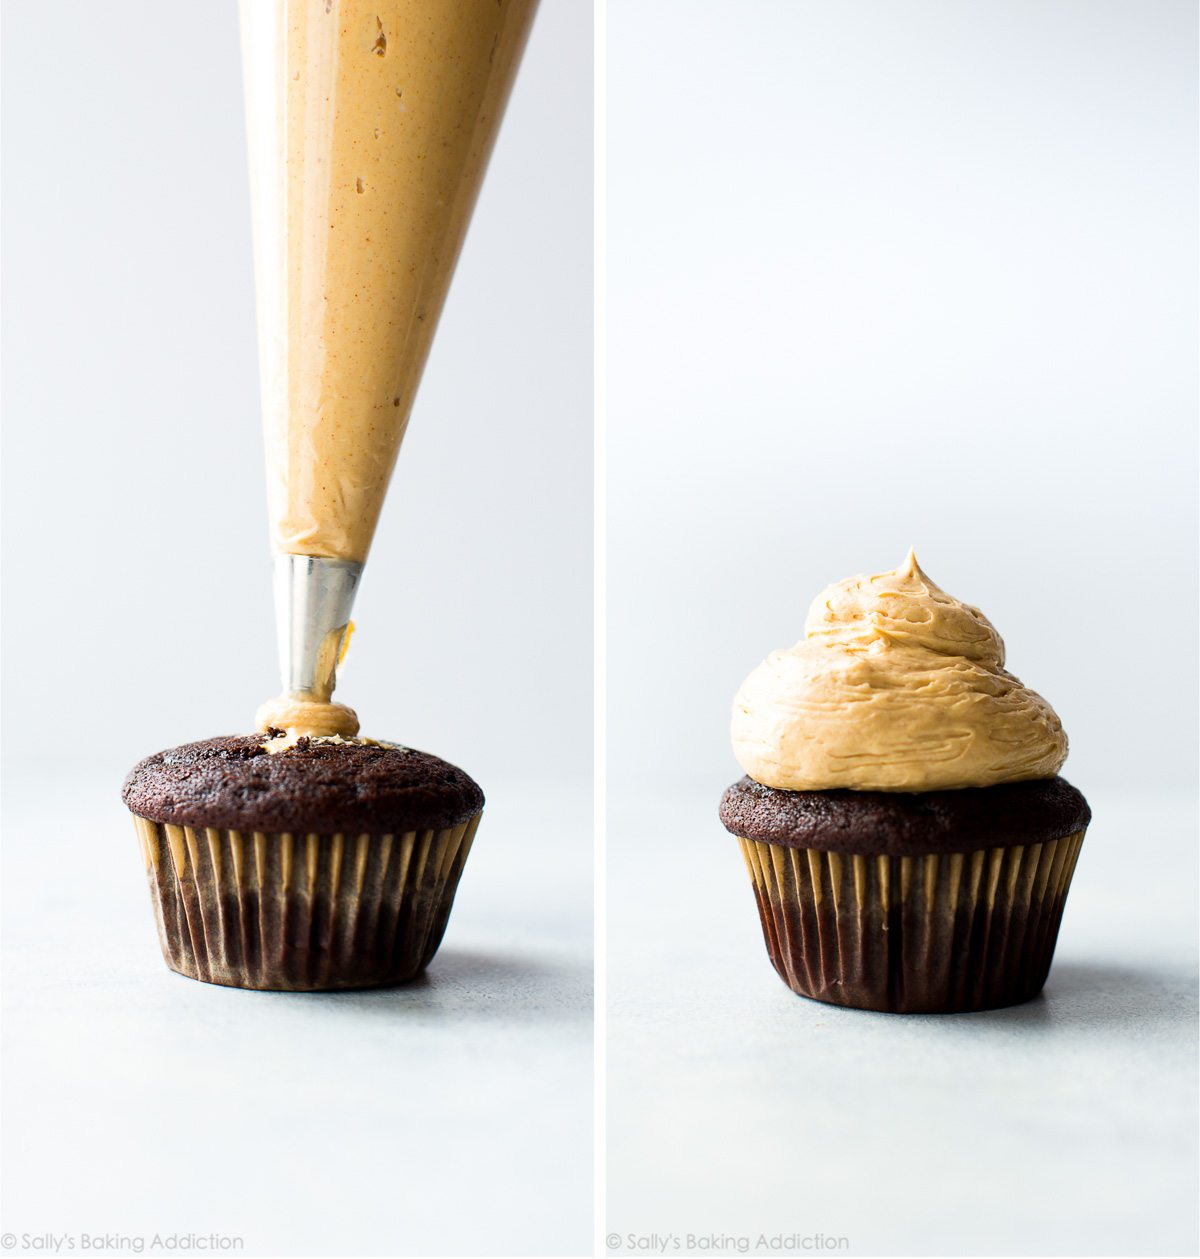 2 images of piping peanut butter meringue frosting onto a chocolate cupcake and a chocolate cupcake with peanut butter meringue frosting